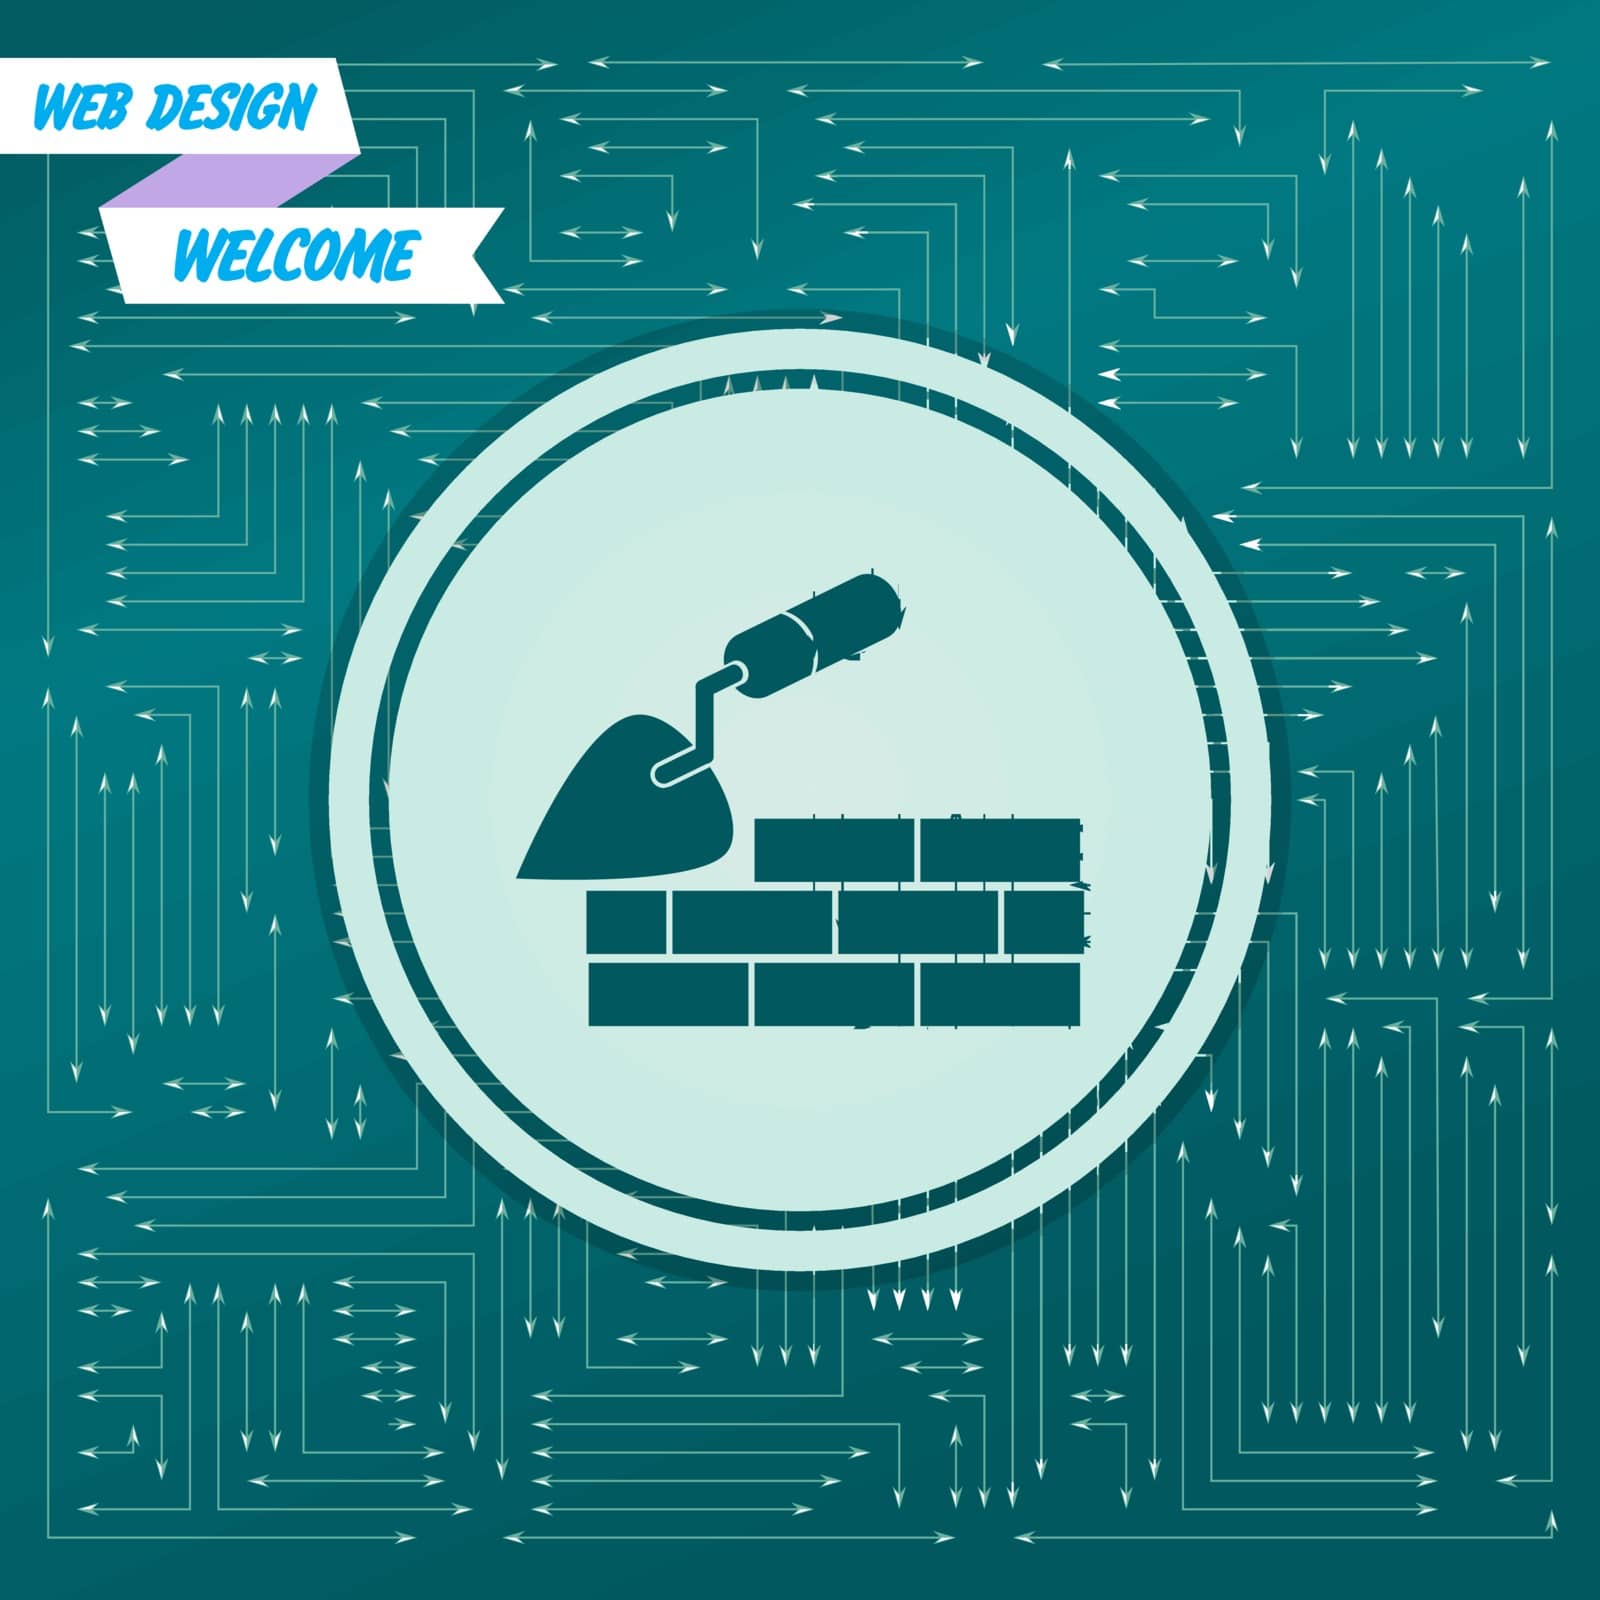 Trowel building and brick wall icon on a green background, with arrows in different directions. It appears on the electronic board. Vector illustration